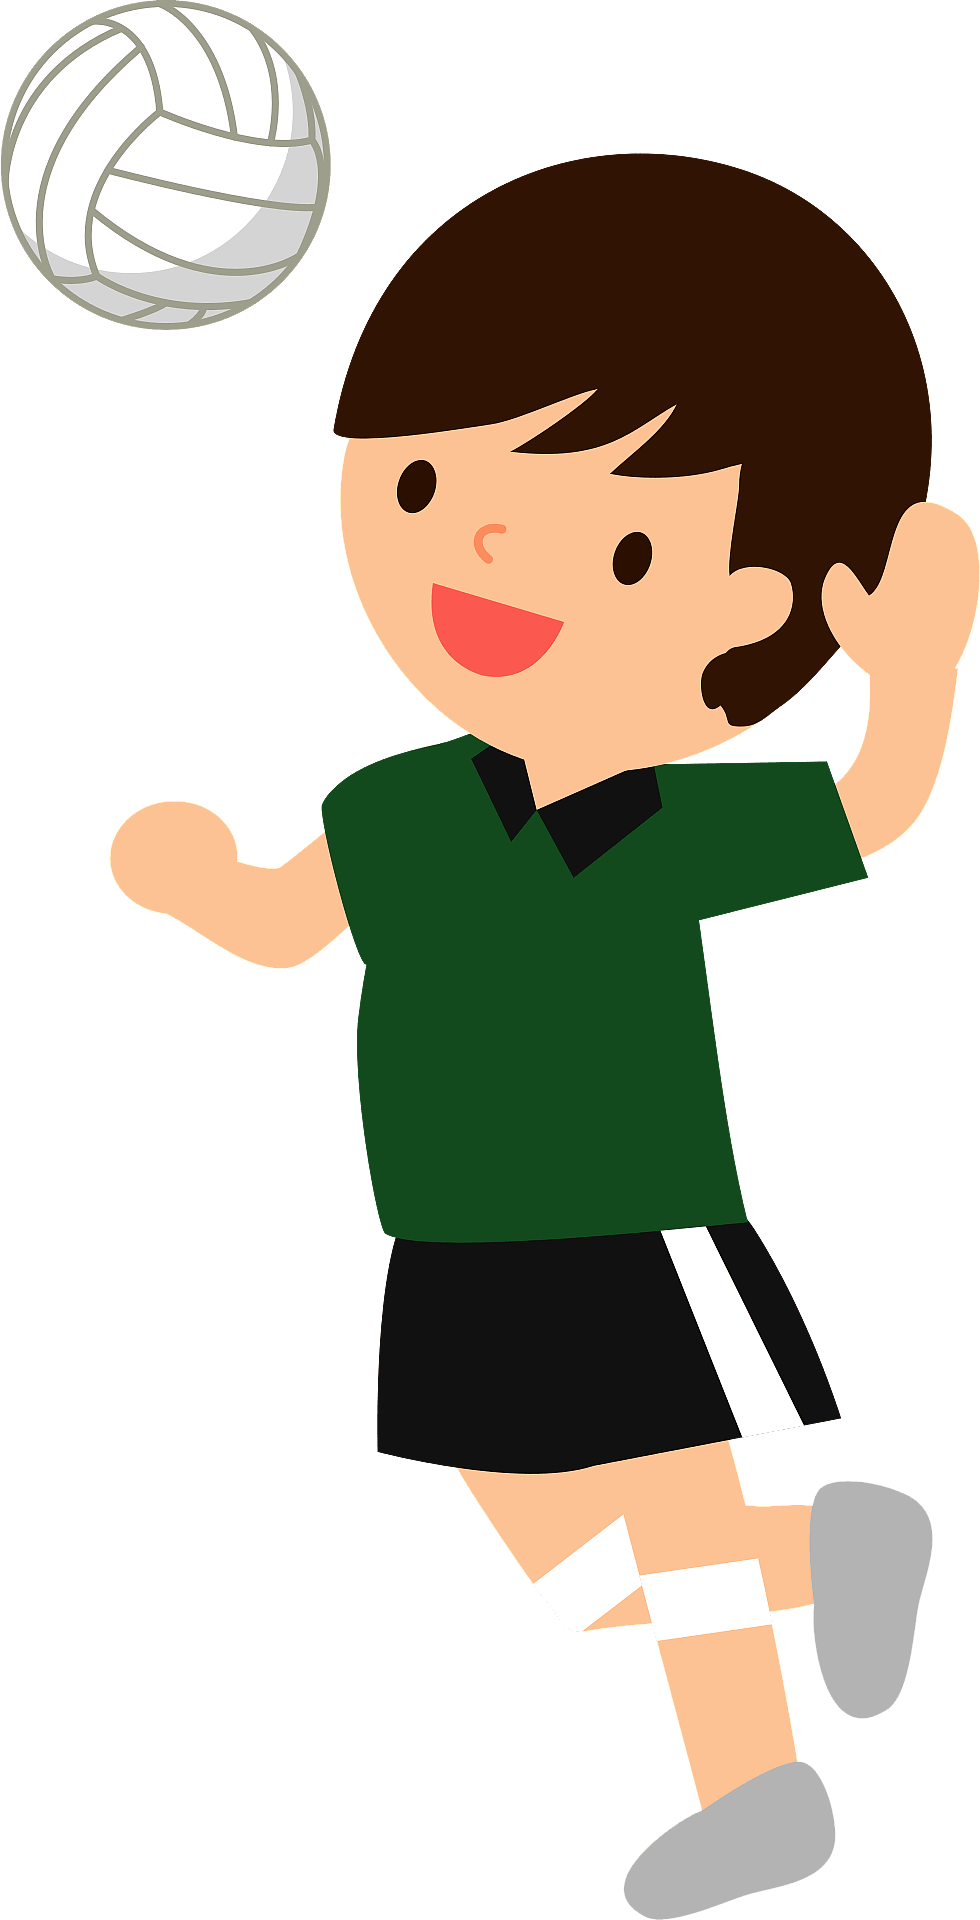 Volleyball Boy Clipart: Celebrate Young Athletes in Volleyball - Clip ...